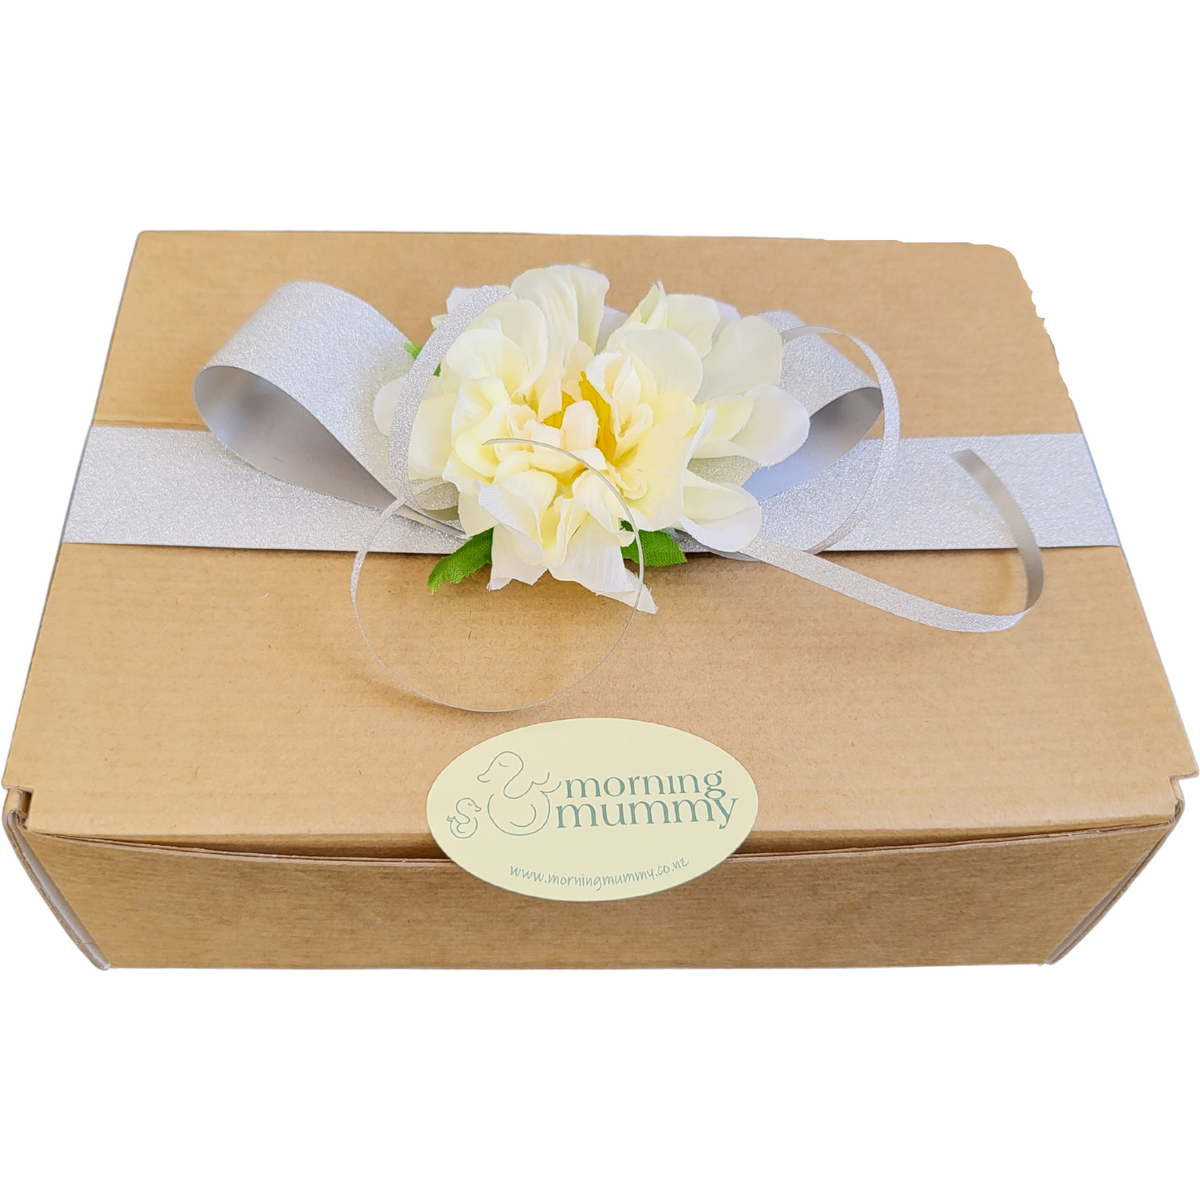 Pamper Pregnancy Gift Box - Special Edition